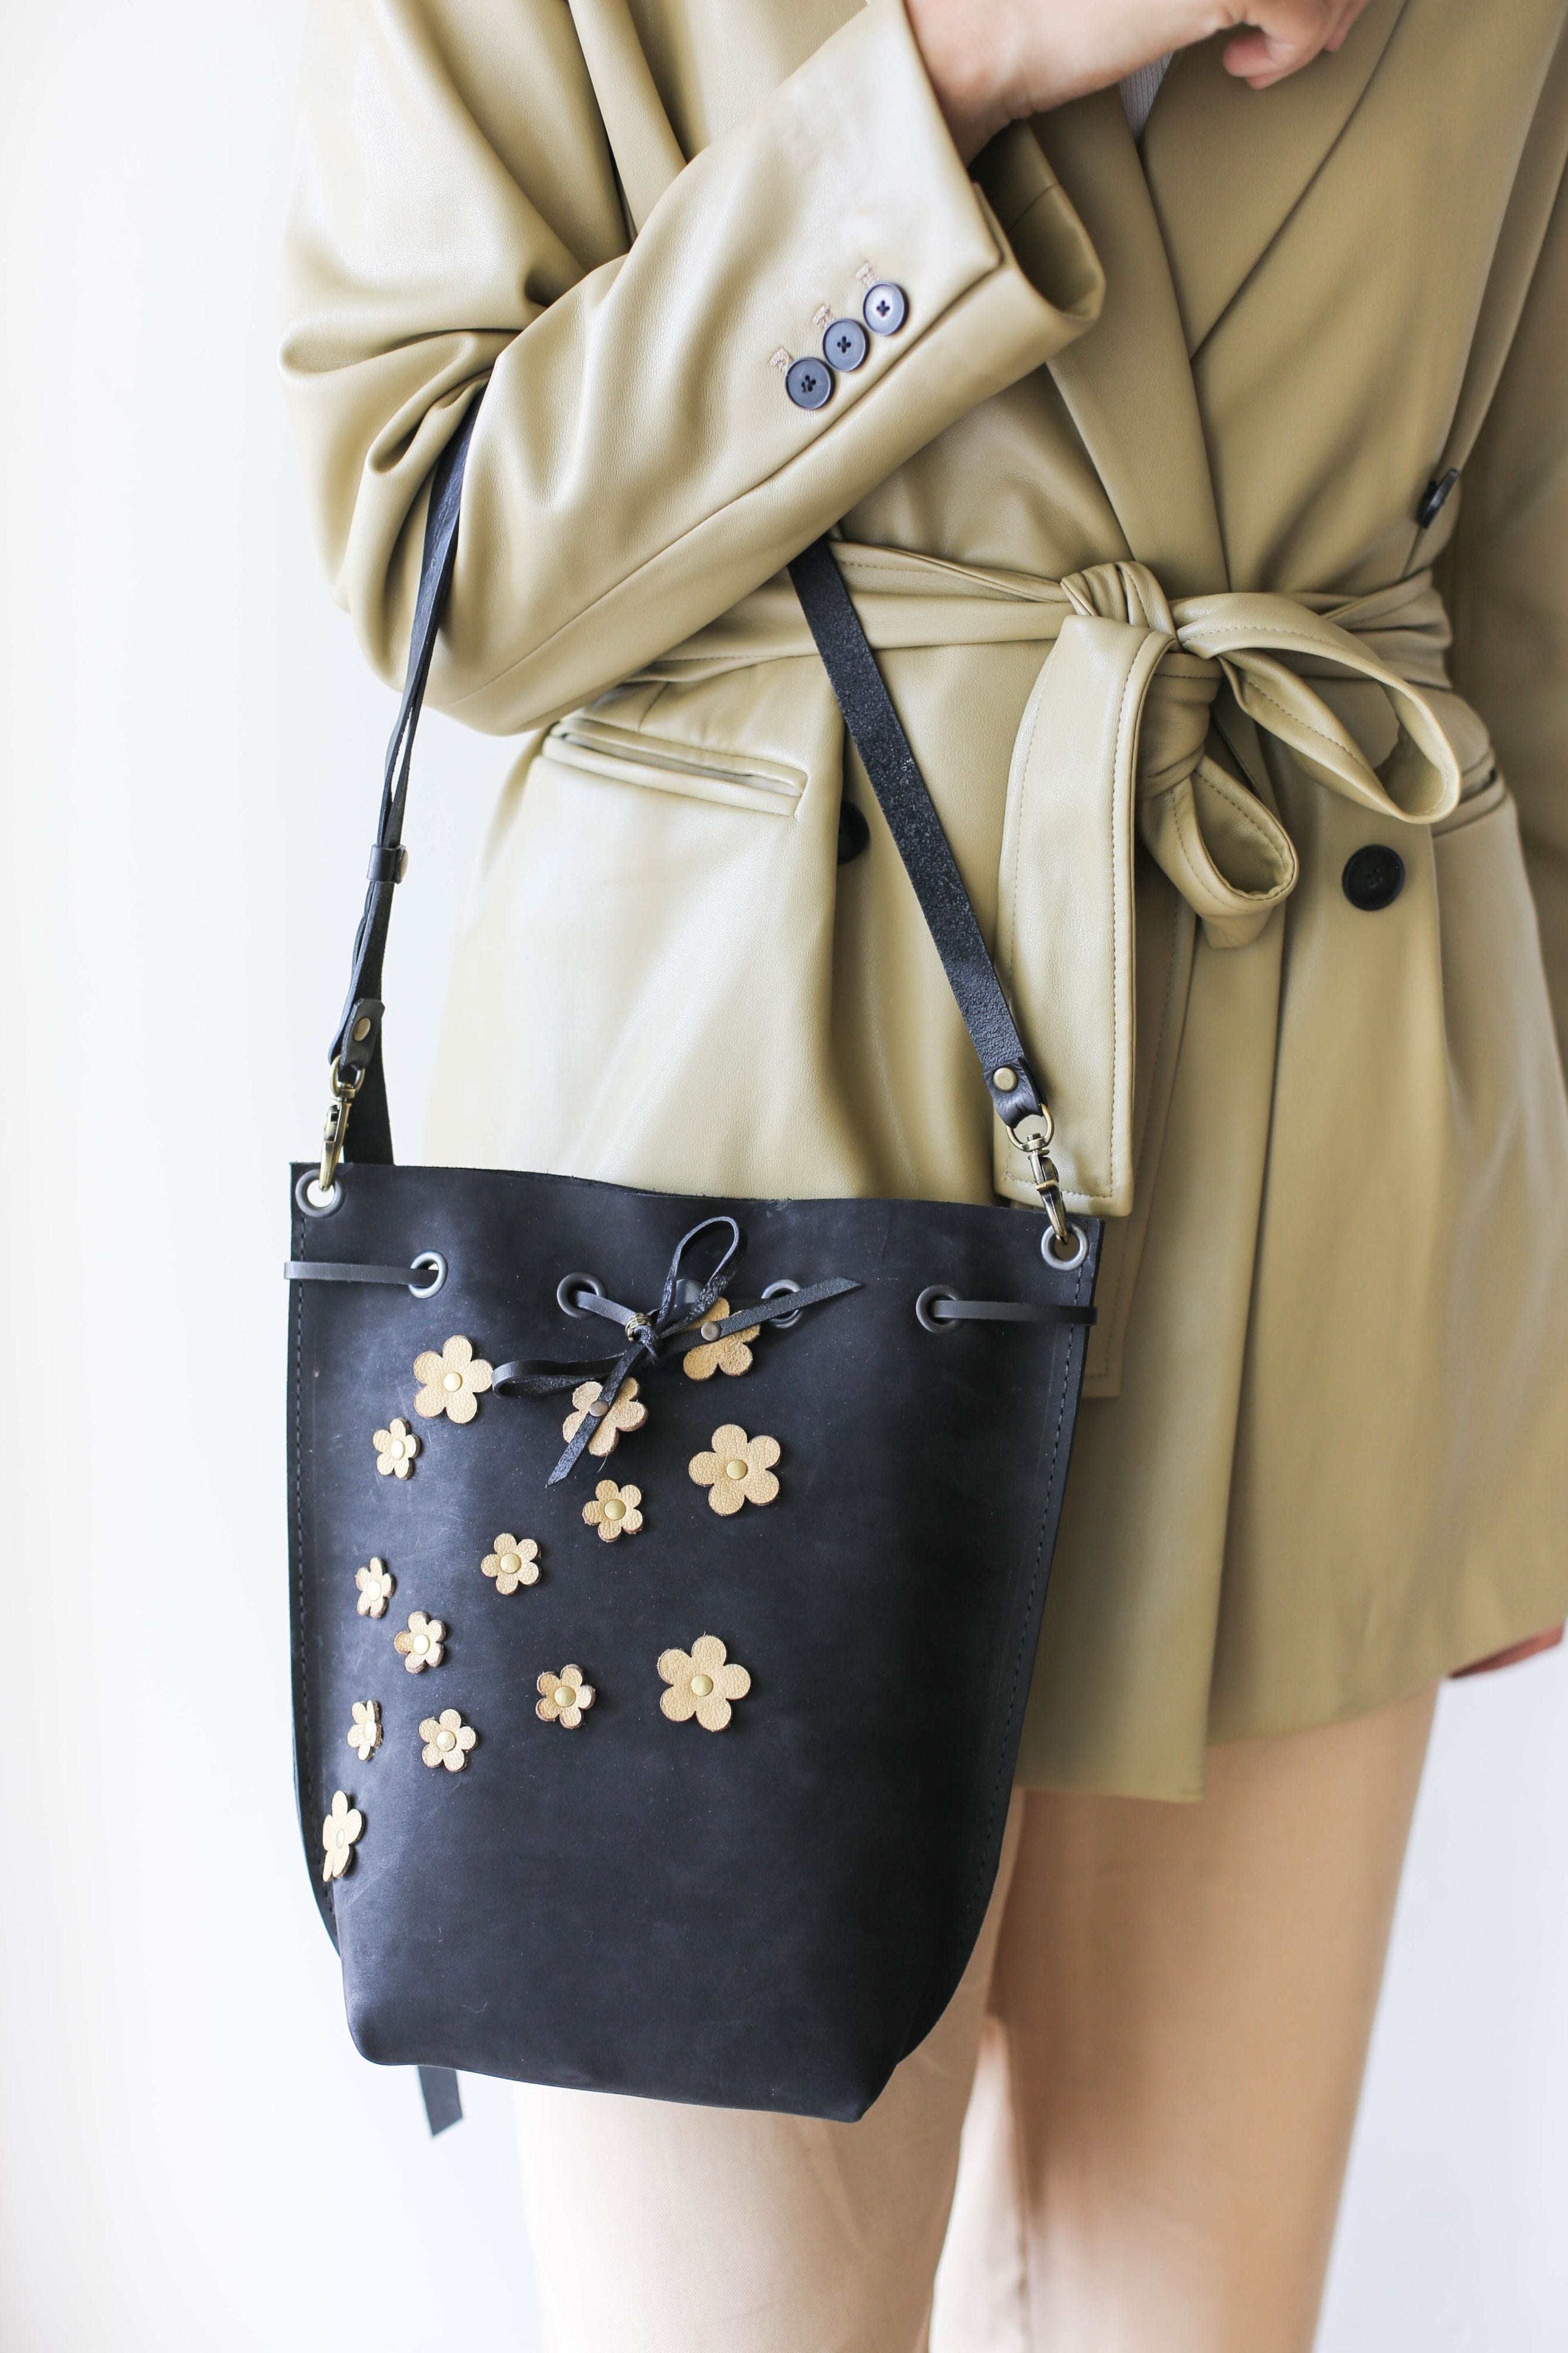 Designer Full Grained Leather Bucket Bag With Gold Plated Stainless Steel  Hardware And Suede Leather Lining Numero Huit Crossbody Tote Tan Handbag  And Purse From Mmstars, $49.81 | DHgate.Com